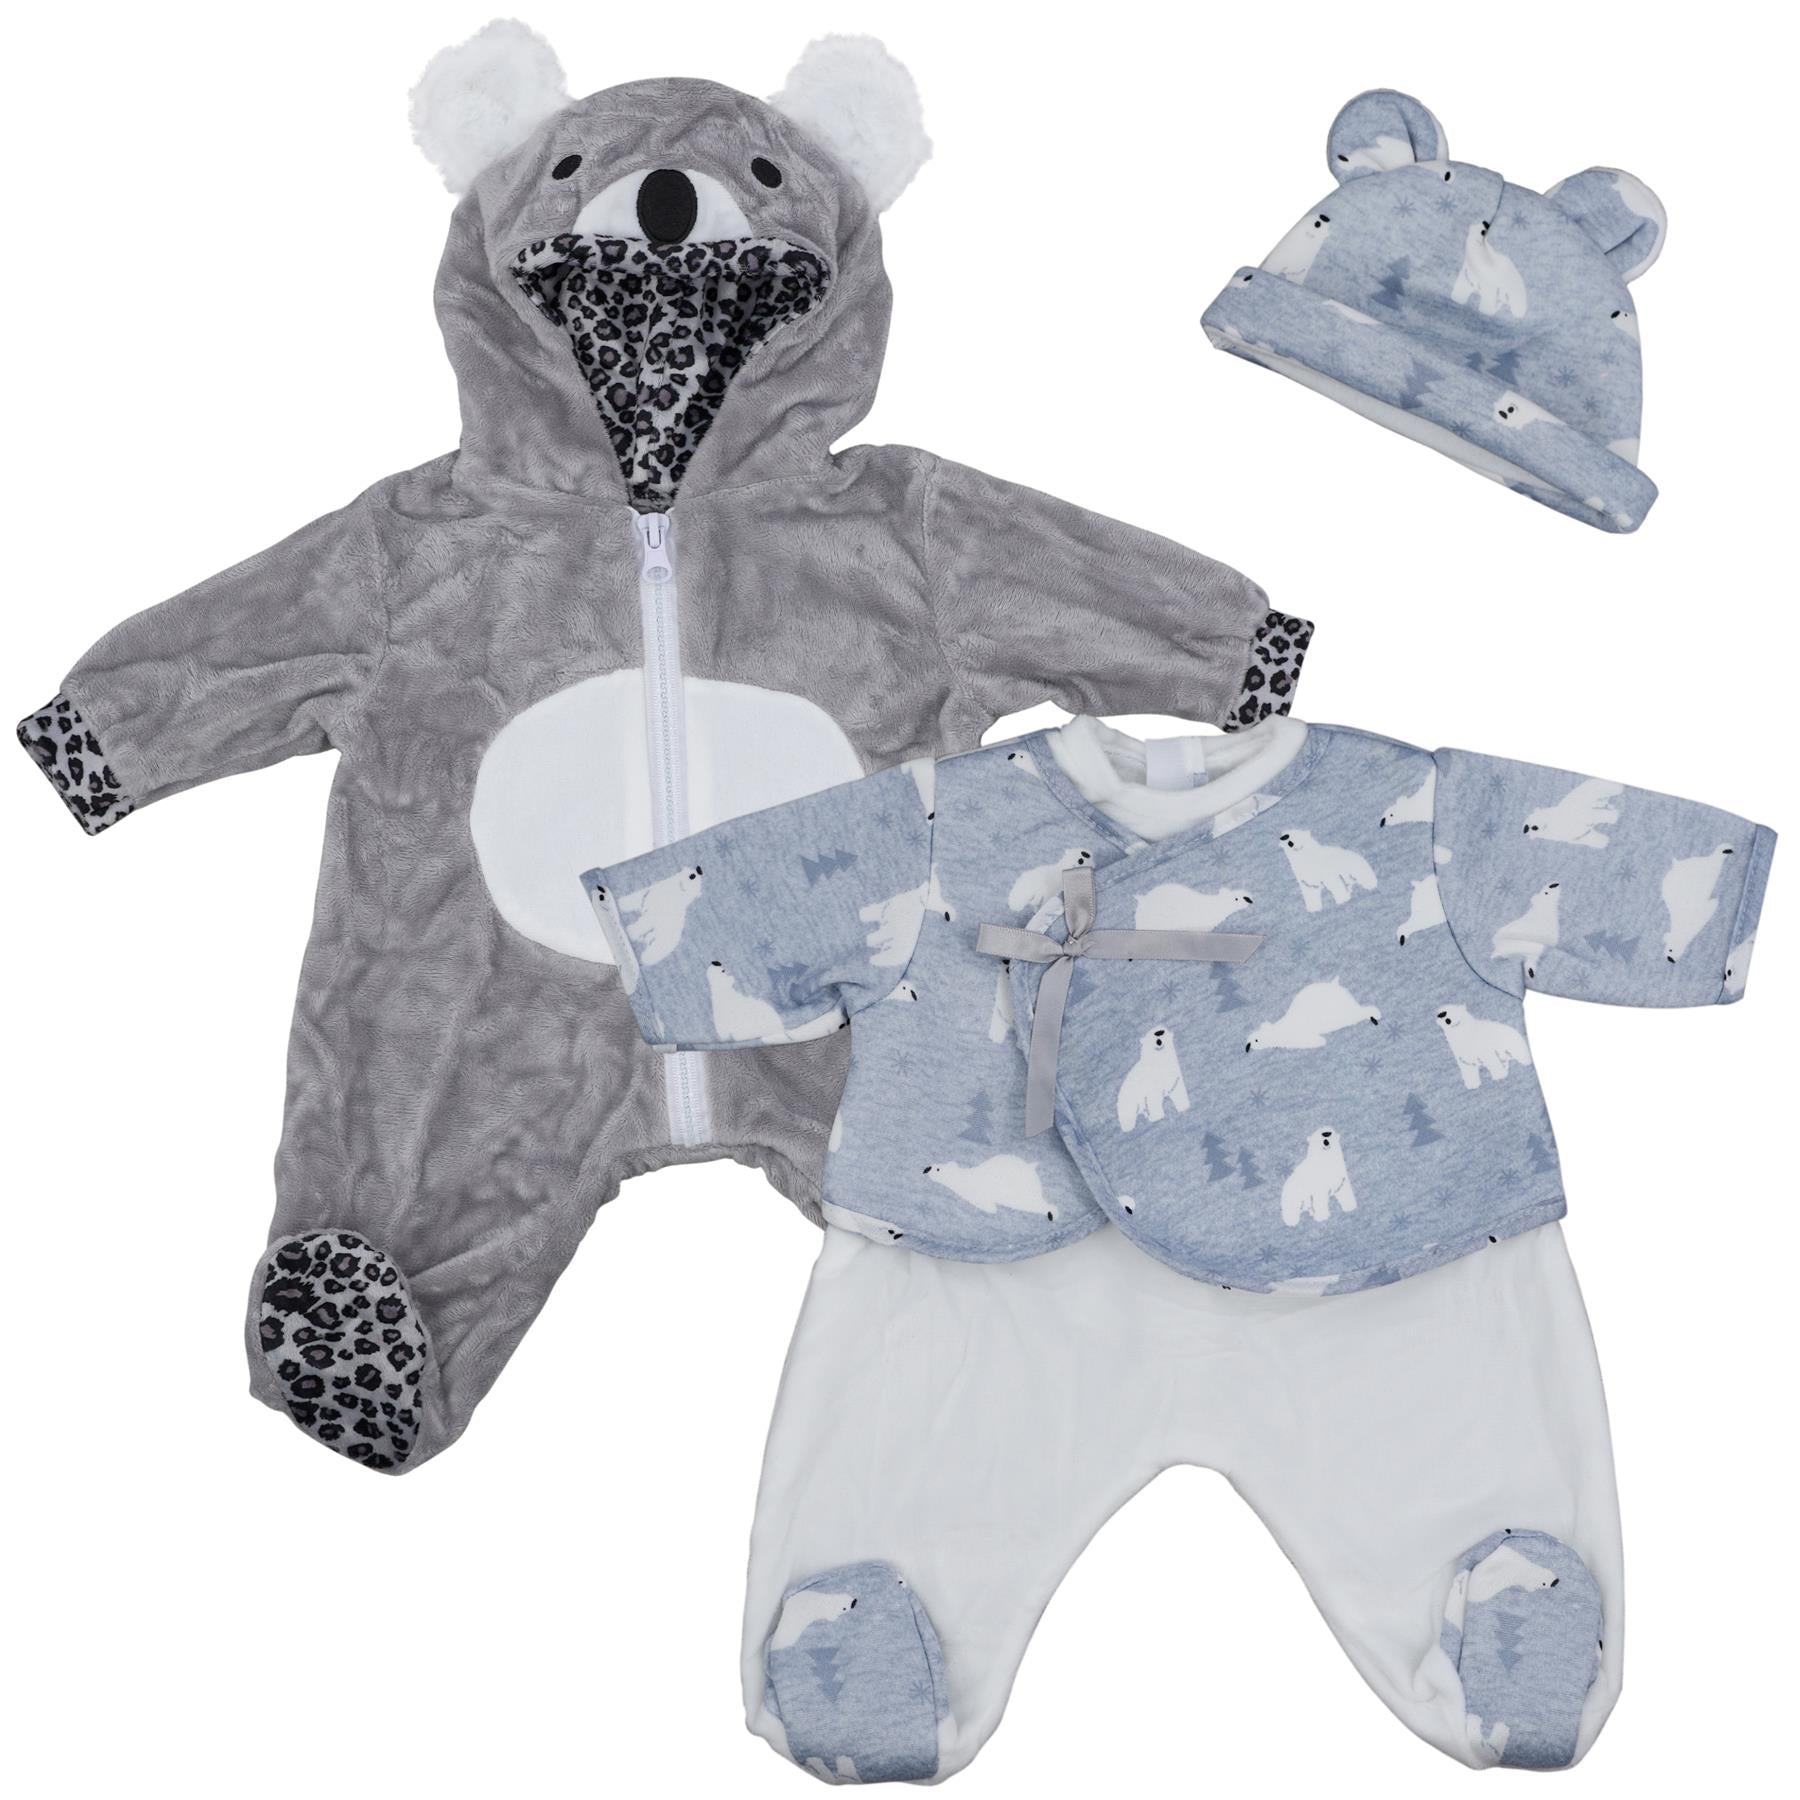 20" Baby Doll Boy Clothes Set Of Two by BiBi Doll - The Magic Toy Shop